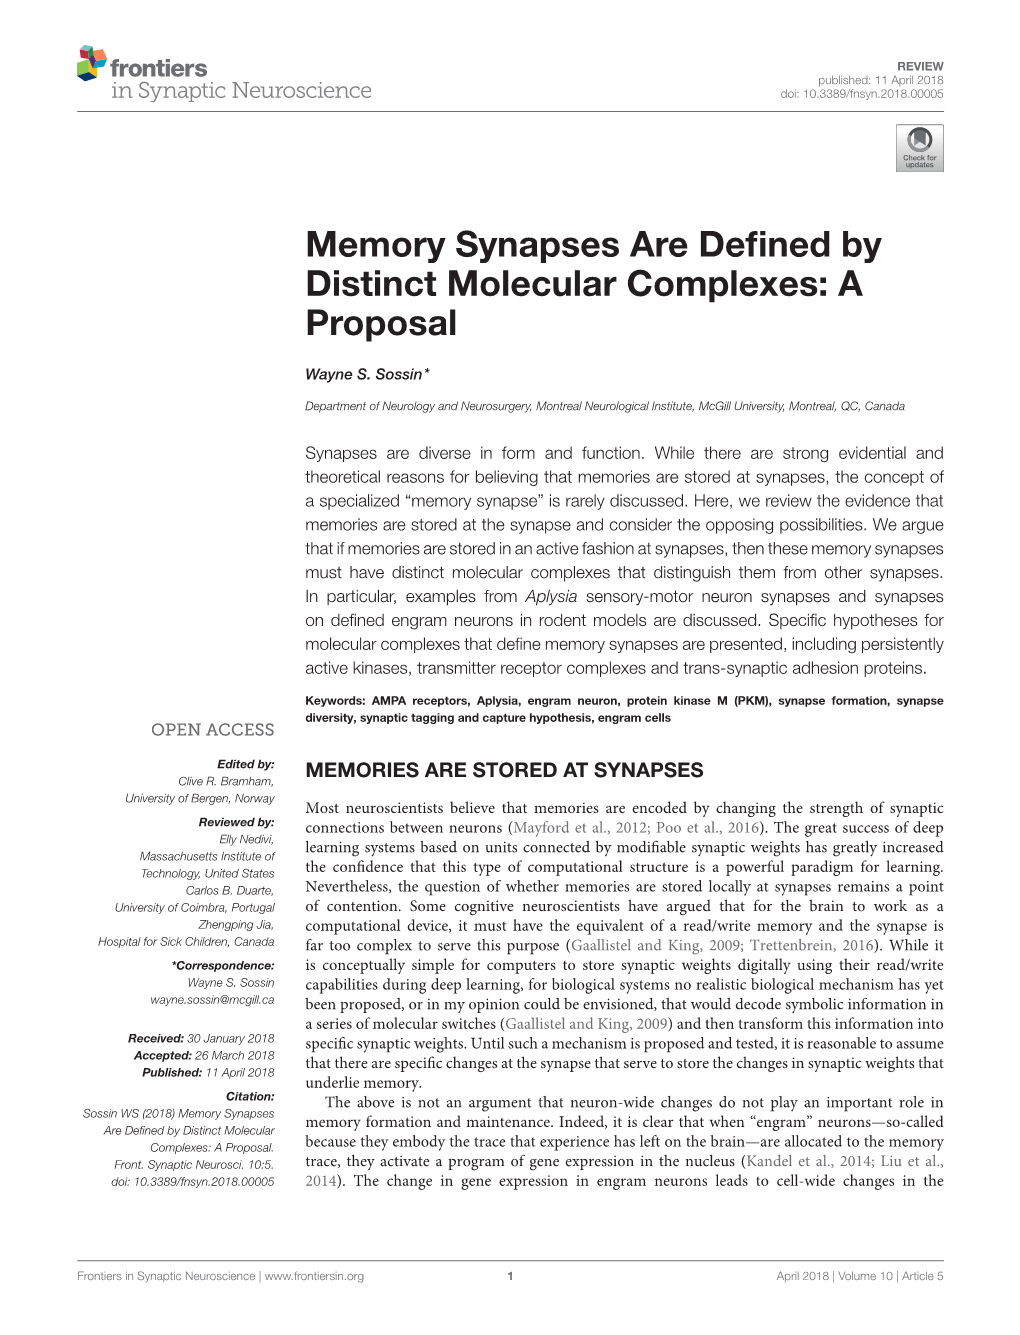 Memory Synapses Are Defined by Distinct Molecular Complexes: A